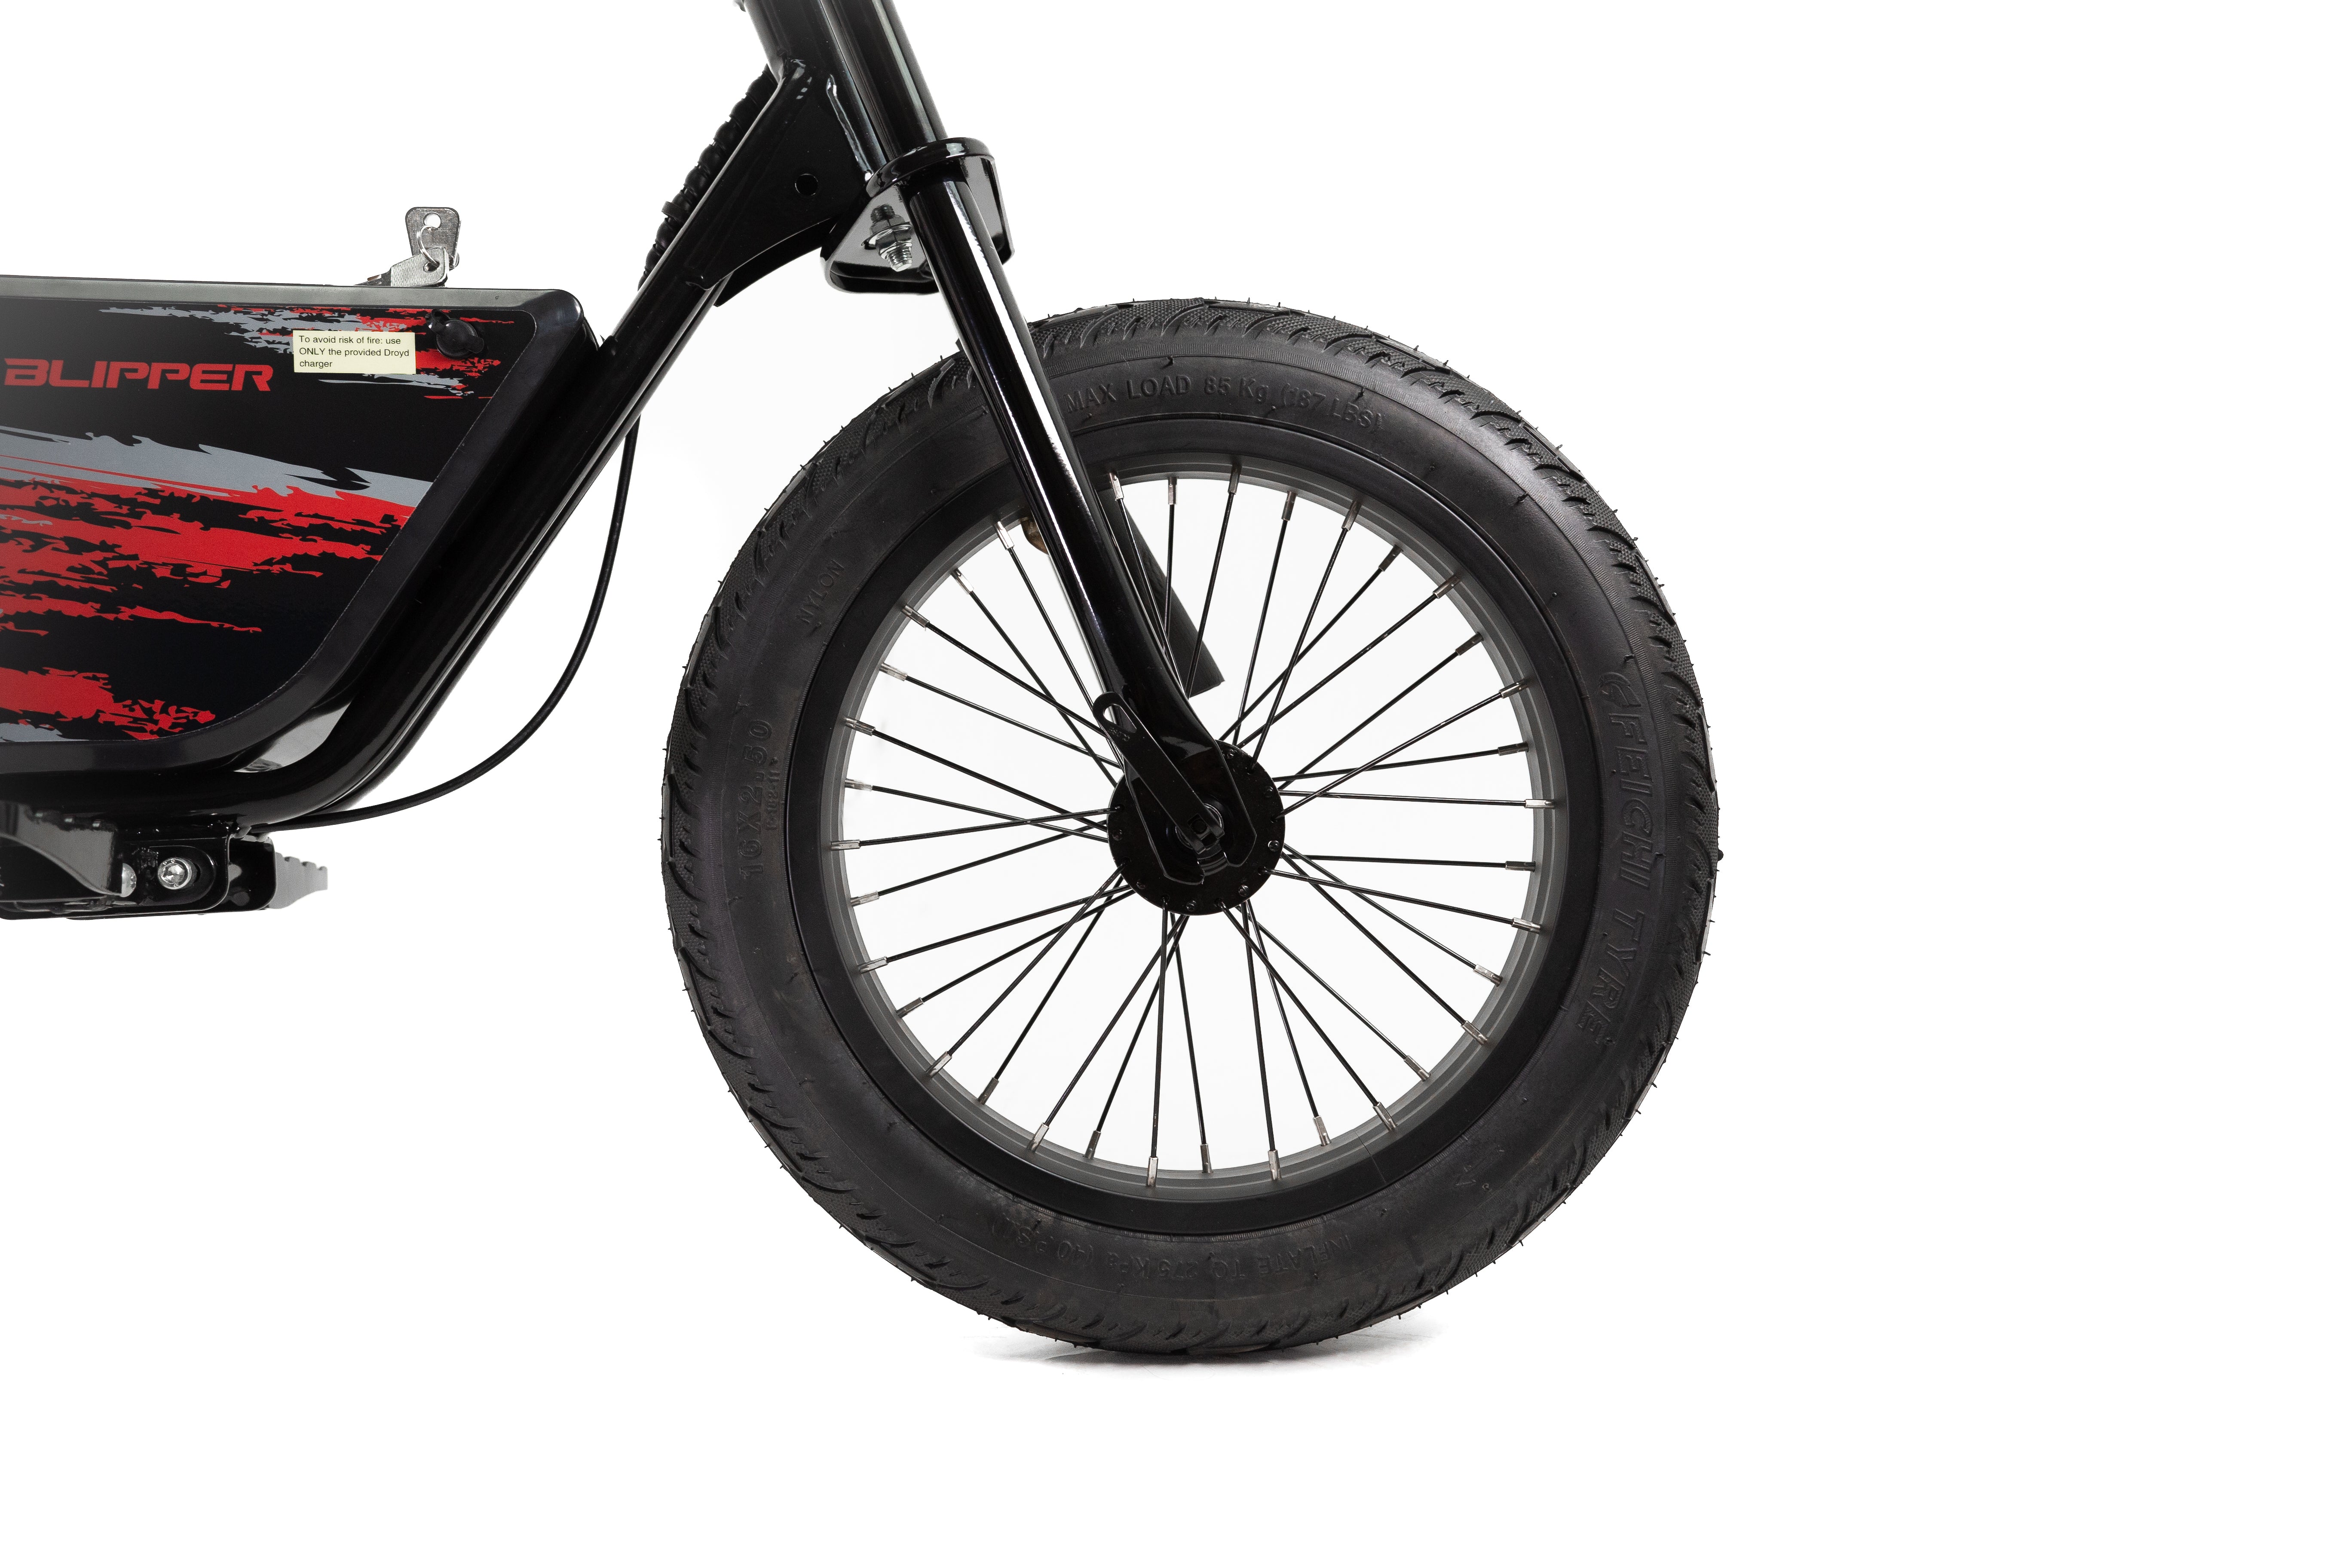 Blipper black colored product front wheel view